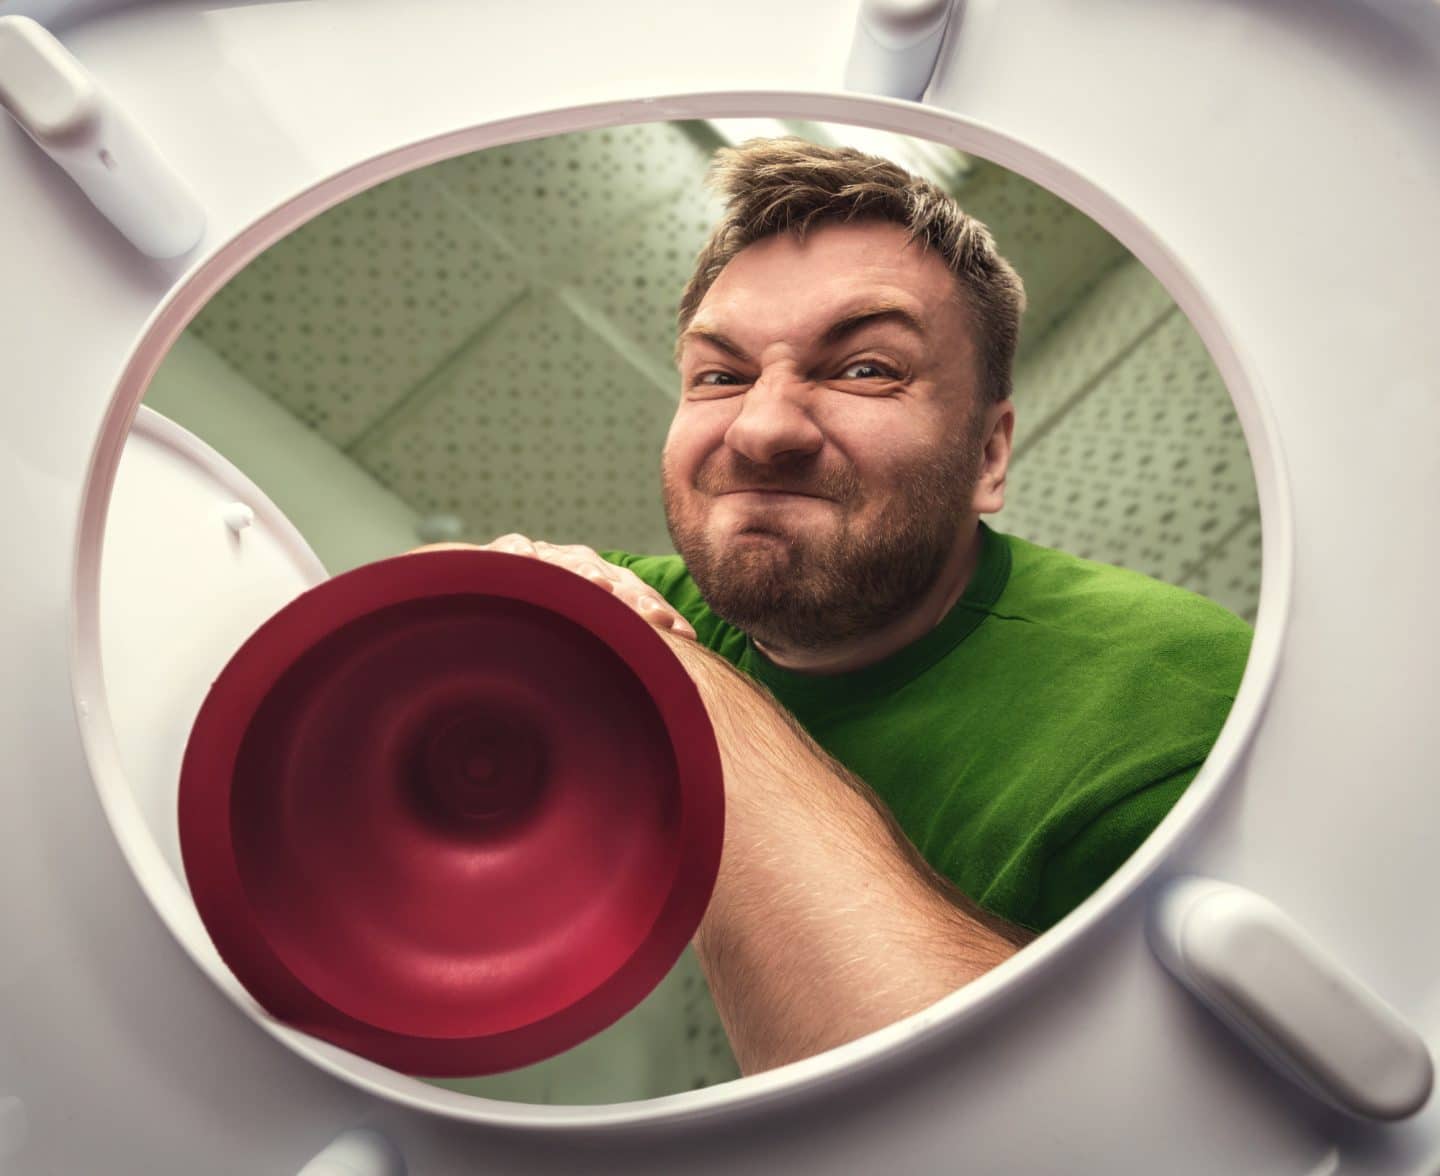 When Should You Call a Plumber for a Clogged Toilet?